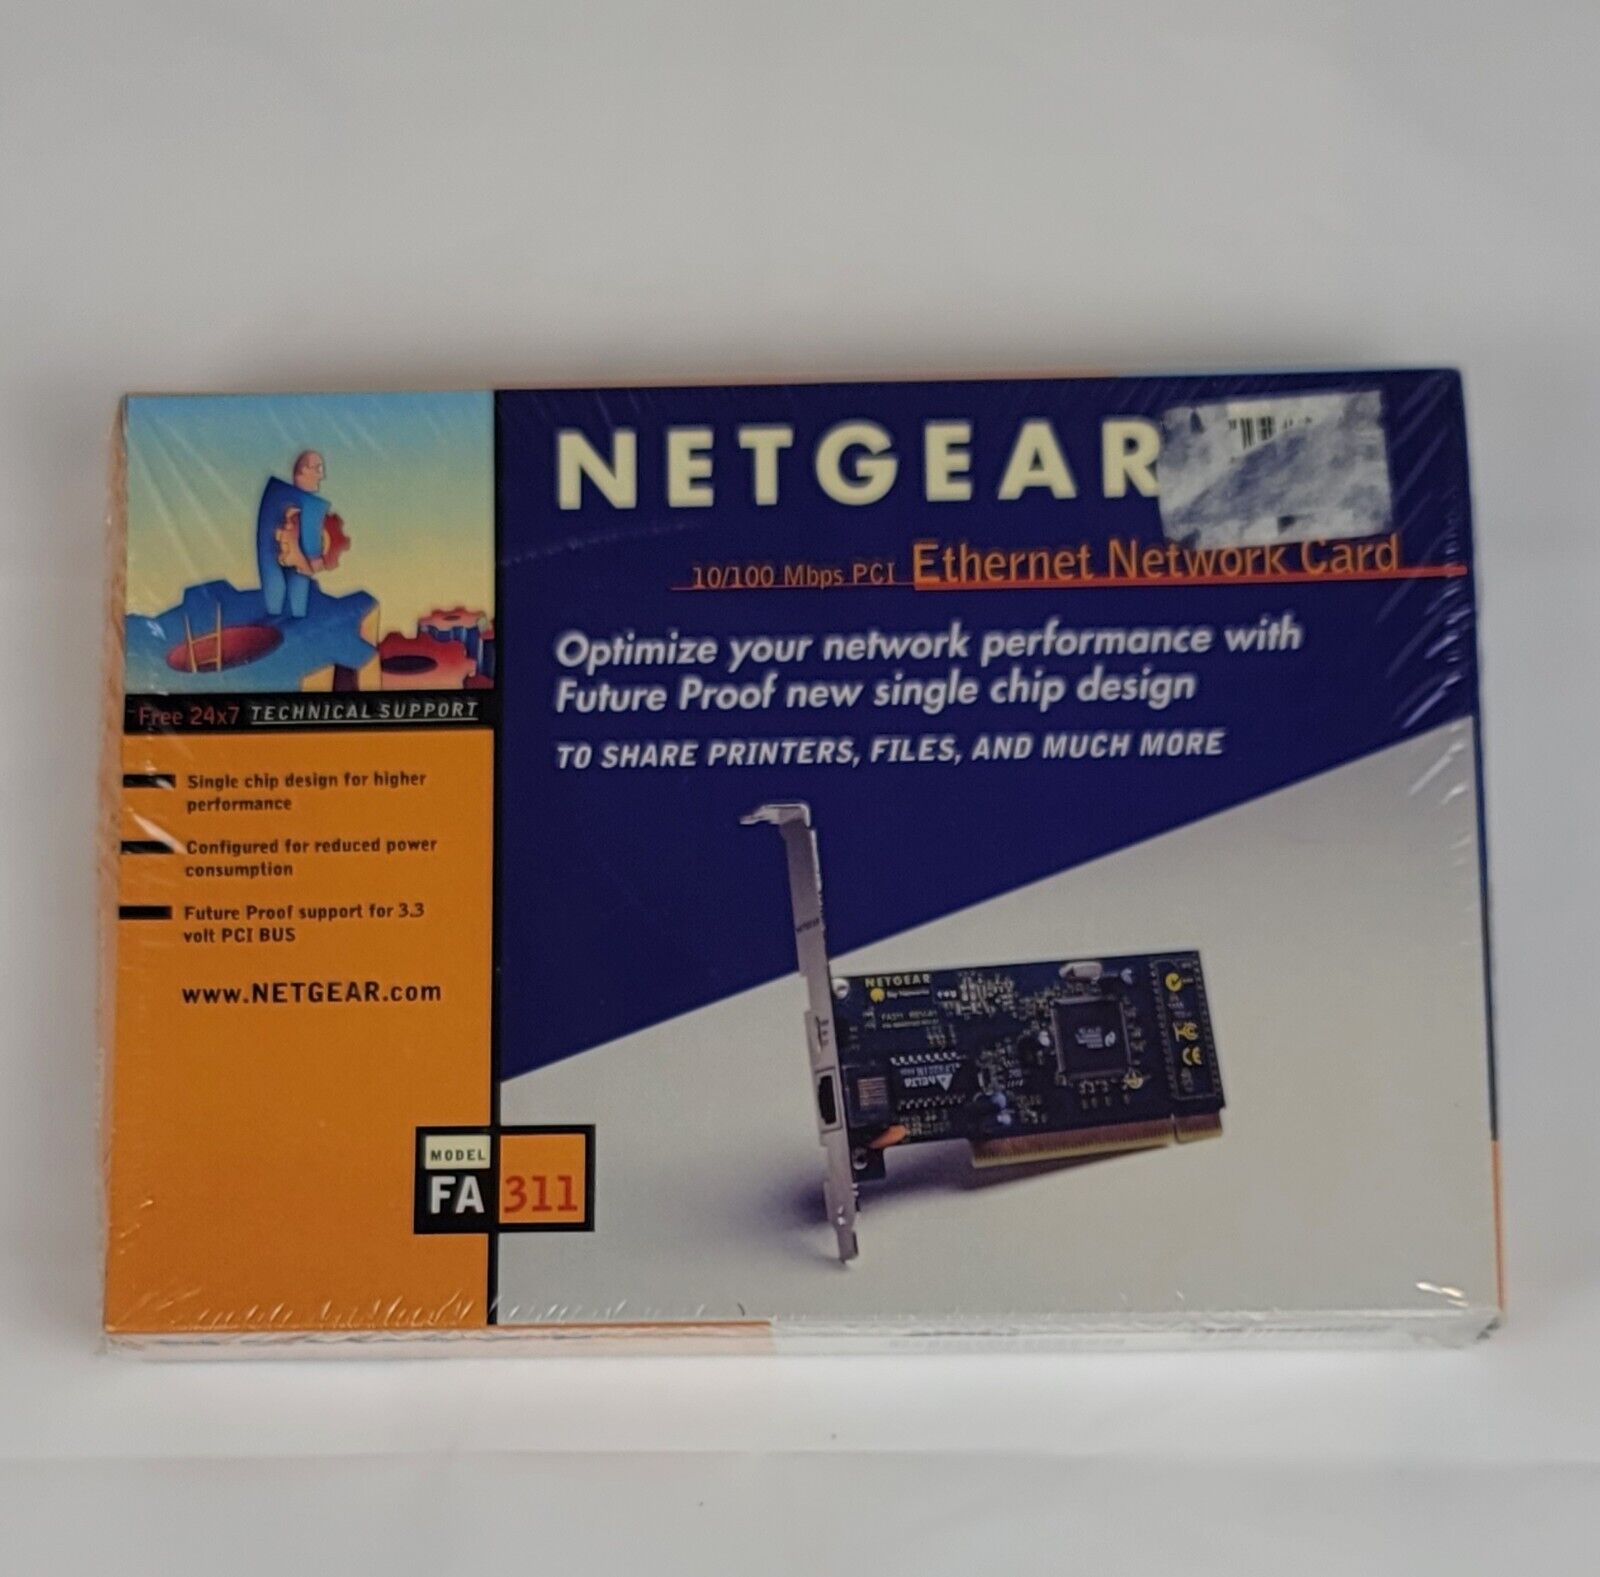 Facotry Sealed Netgear 10/100 Mbps PCI Ethernet Network Card FA311 Fast Shipping